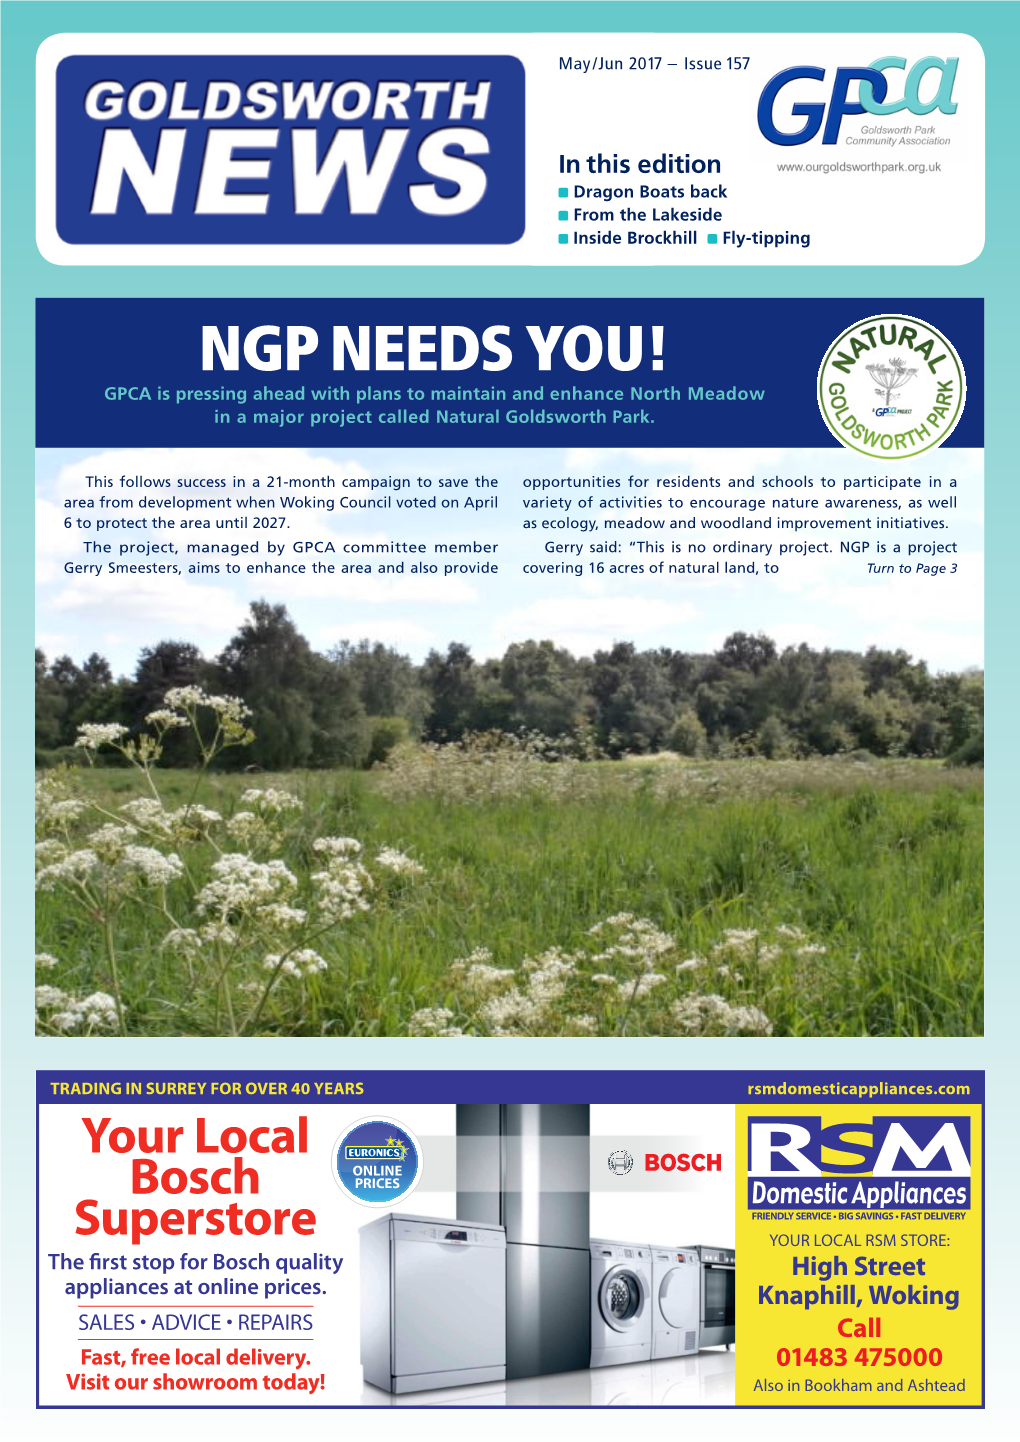 NGP NEEDS YOU! GPCA Is Pressing Ahead with Plans to Maintain and Enhance North Meadow in a Major Project Called Natural Goldsworth Park